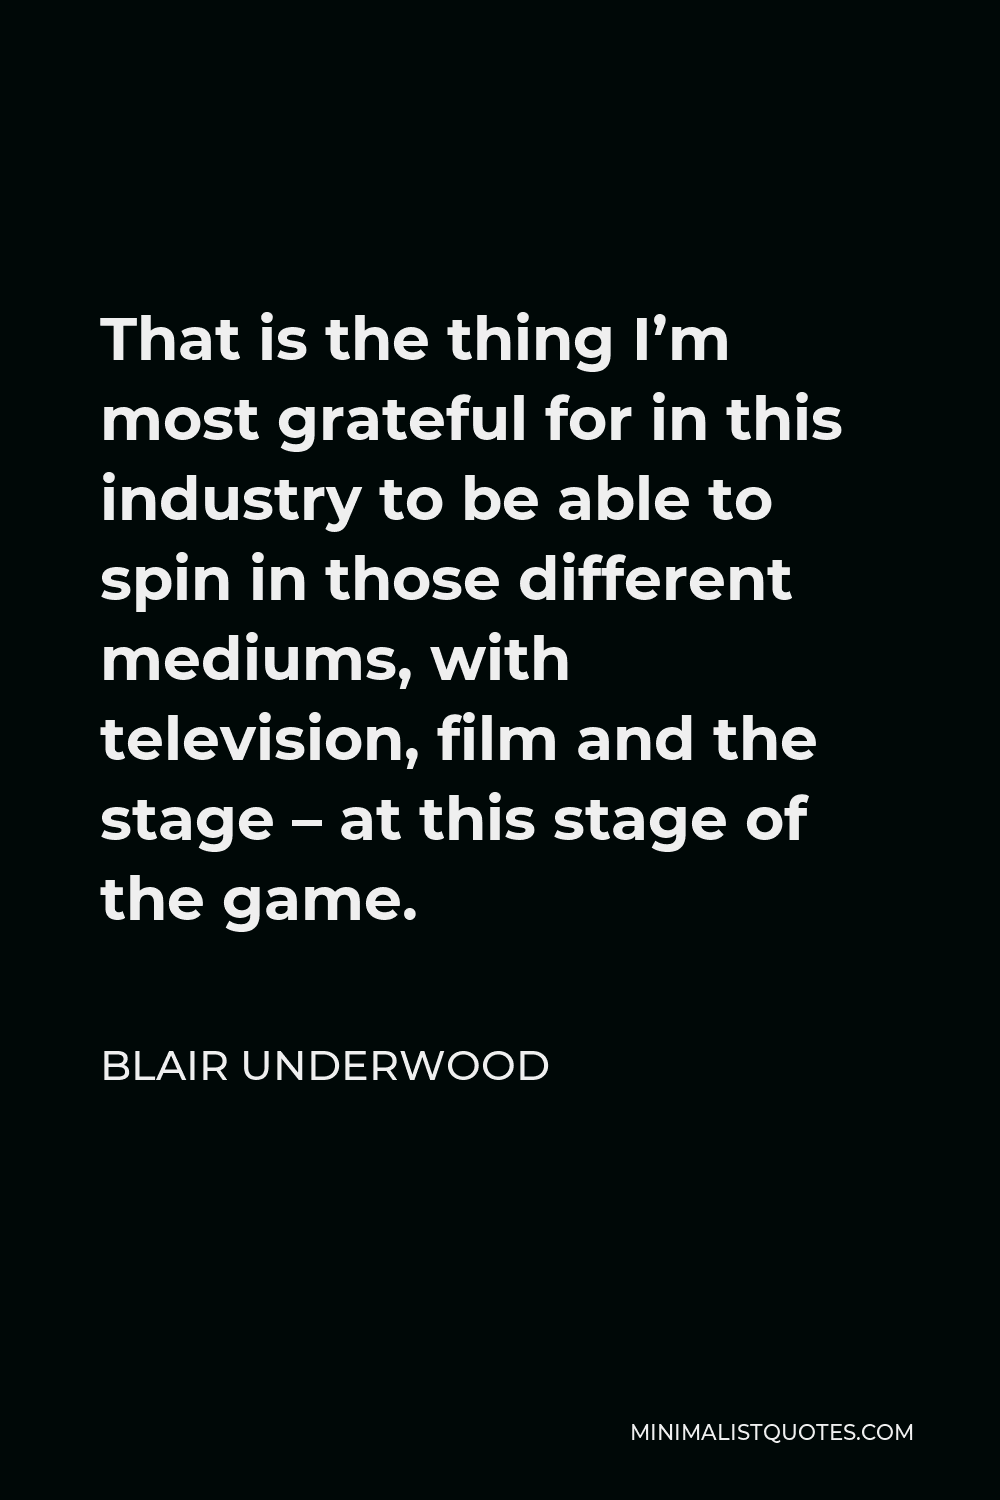 Blair Underwood Quote - That is the thing I’m most grateful for in this industry to be able to spin in those different mediums, with television, film and the stage – at this stage of the game.